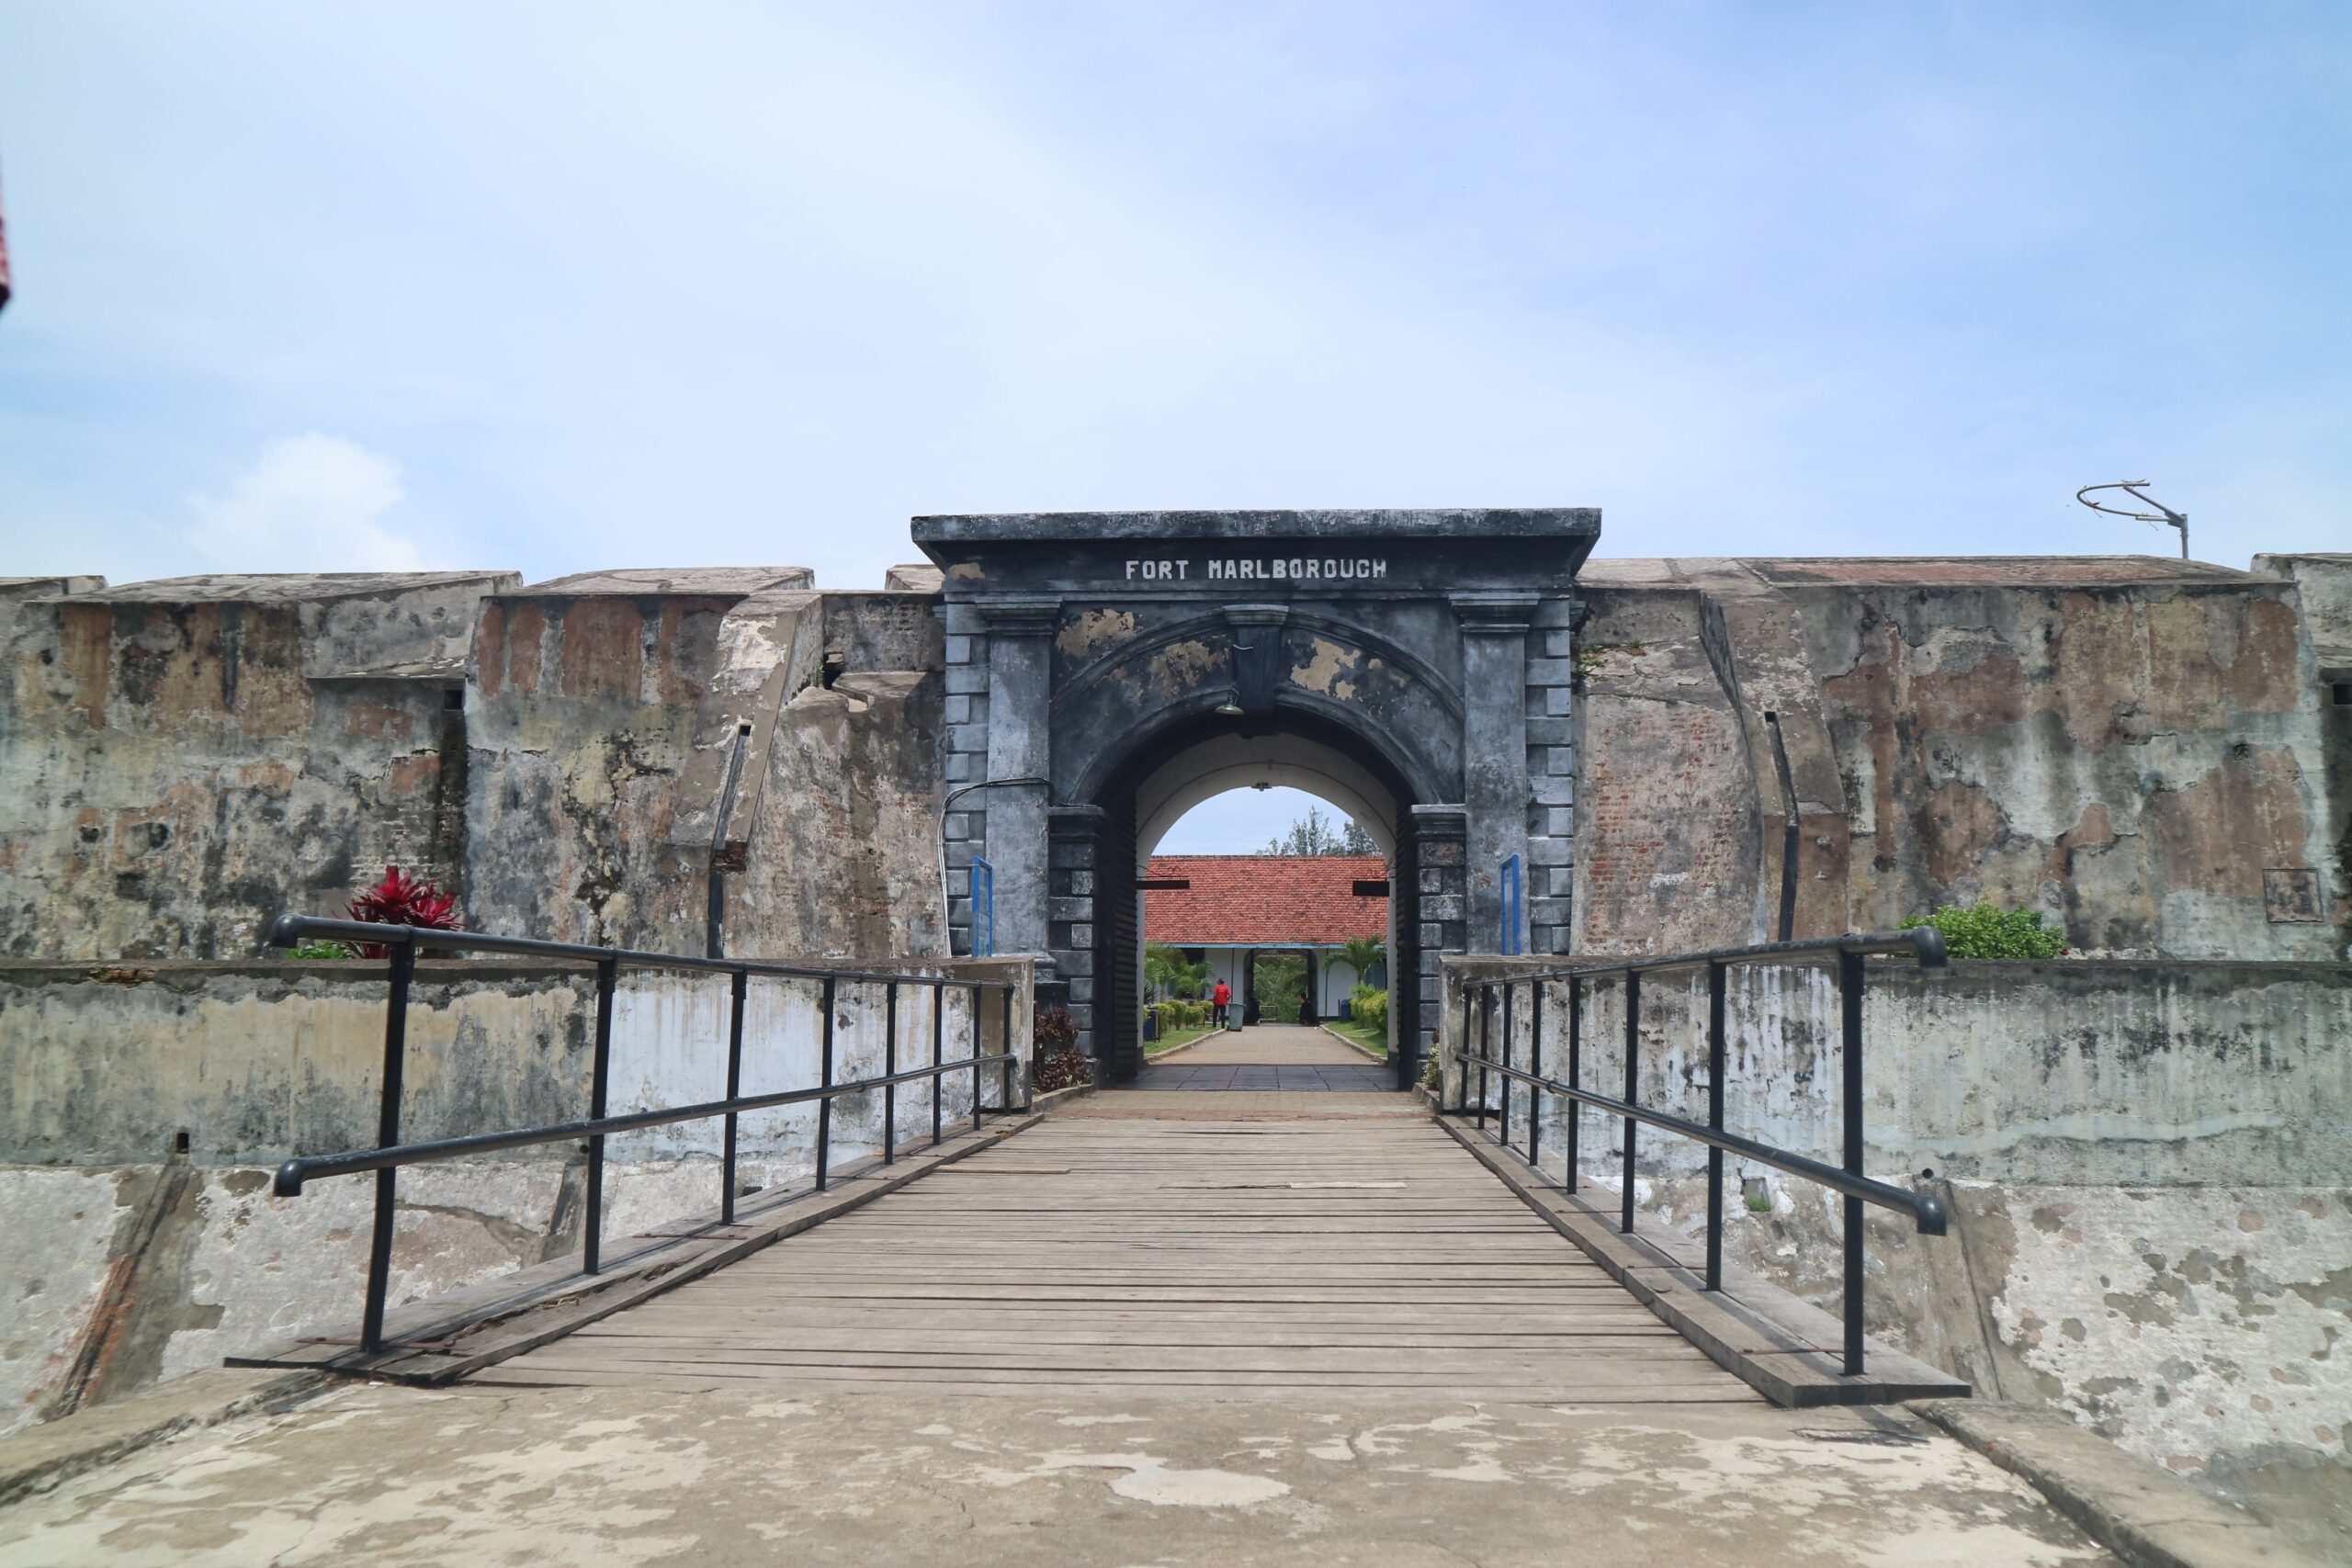 Fort Marlborough is a historical fort located in Bengkulu, Indonesia.